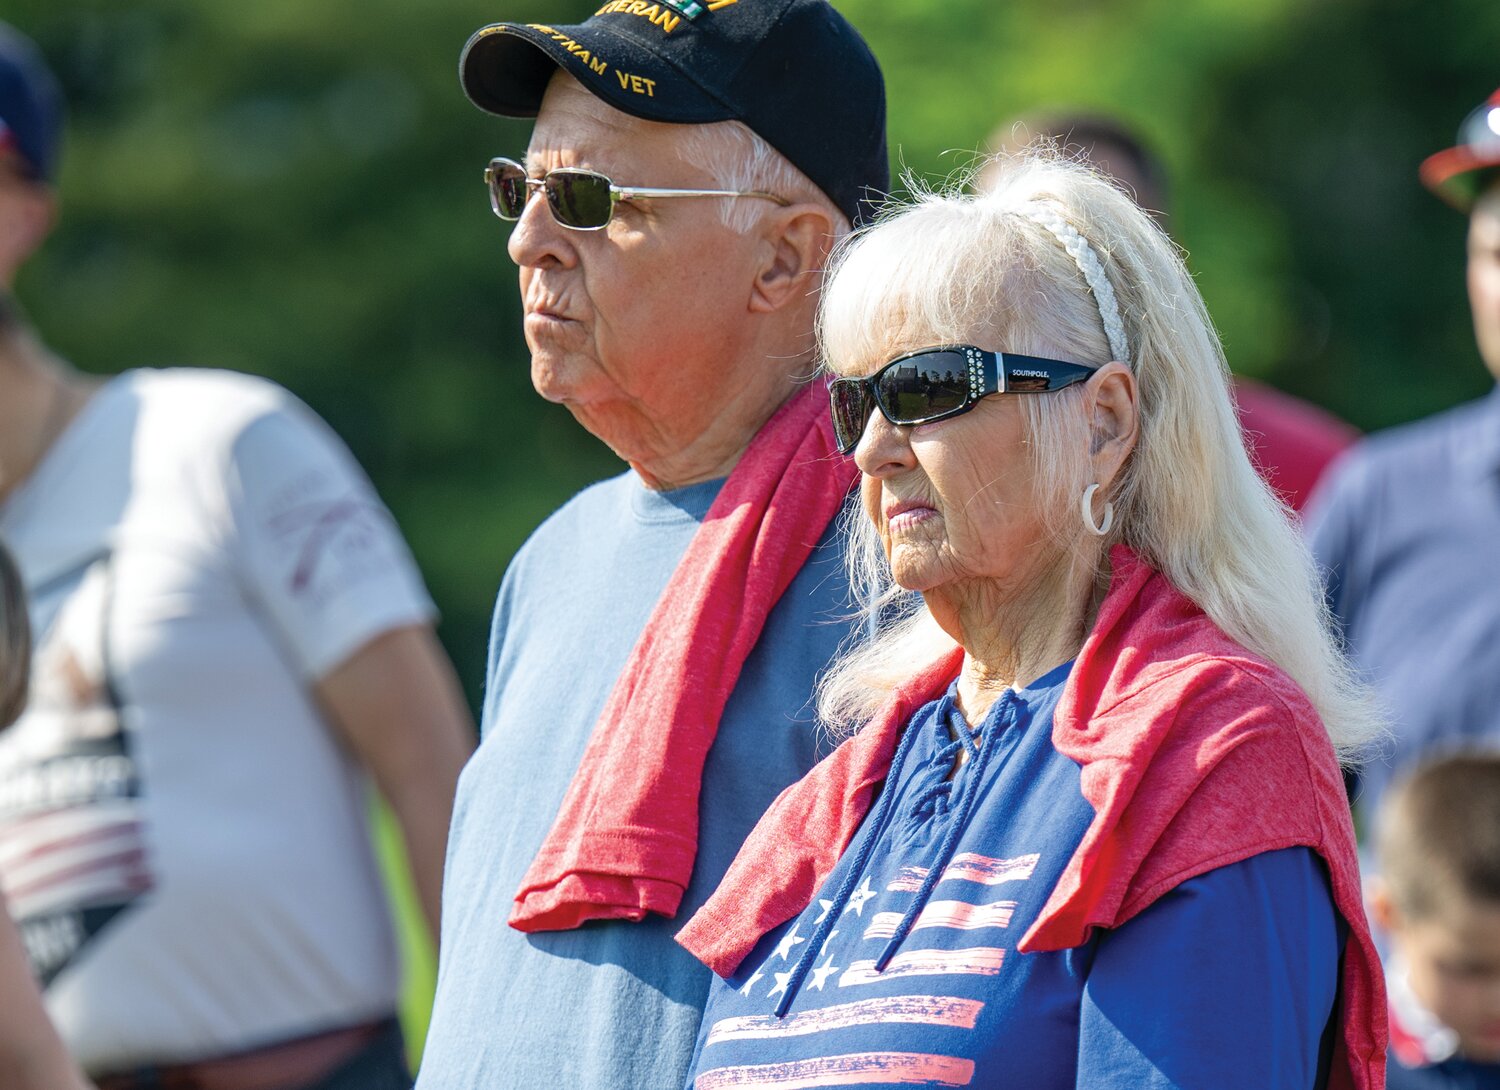 Members of the community came to Washington Crossing National Cemetery on Memorial Day to honor the sacrifices of the country’s military heroes.